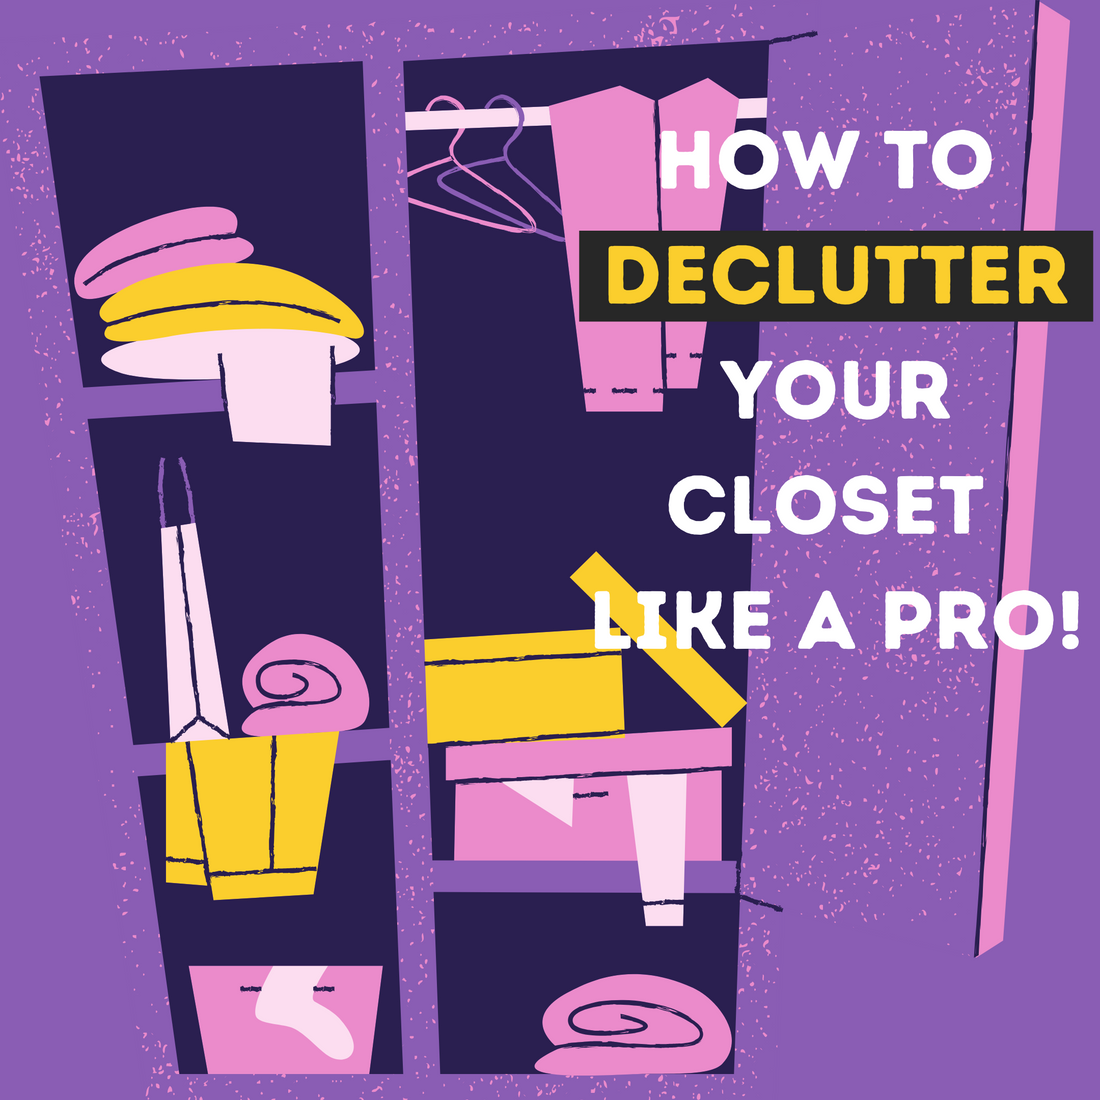 How to Declutter Your Closet Like A Pro!